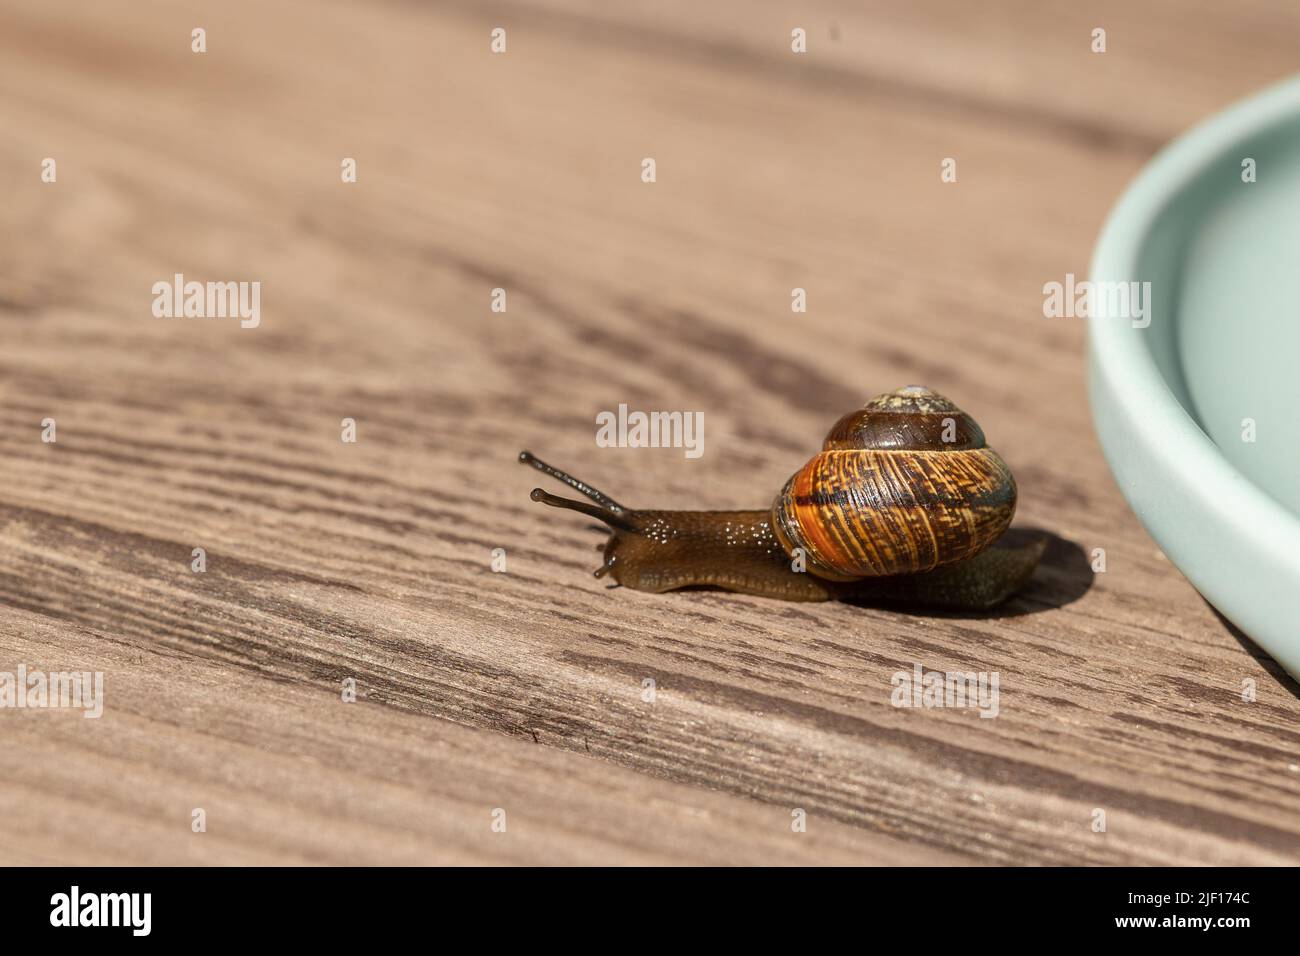 Beautiful garden snails crawling on wooden background. High quality photo Stock Photo